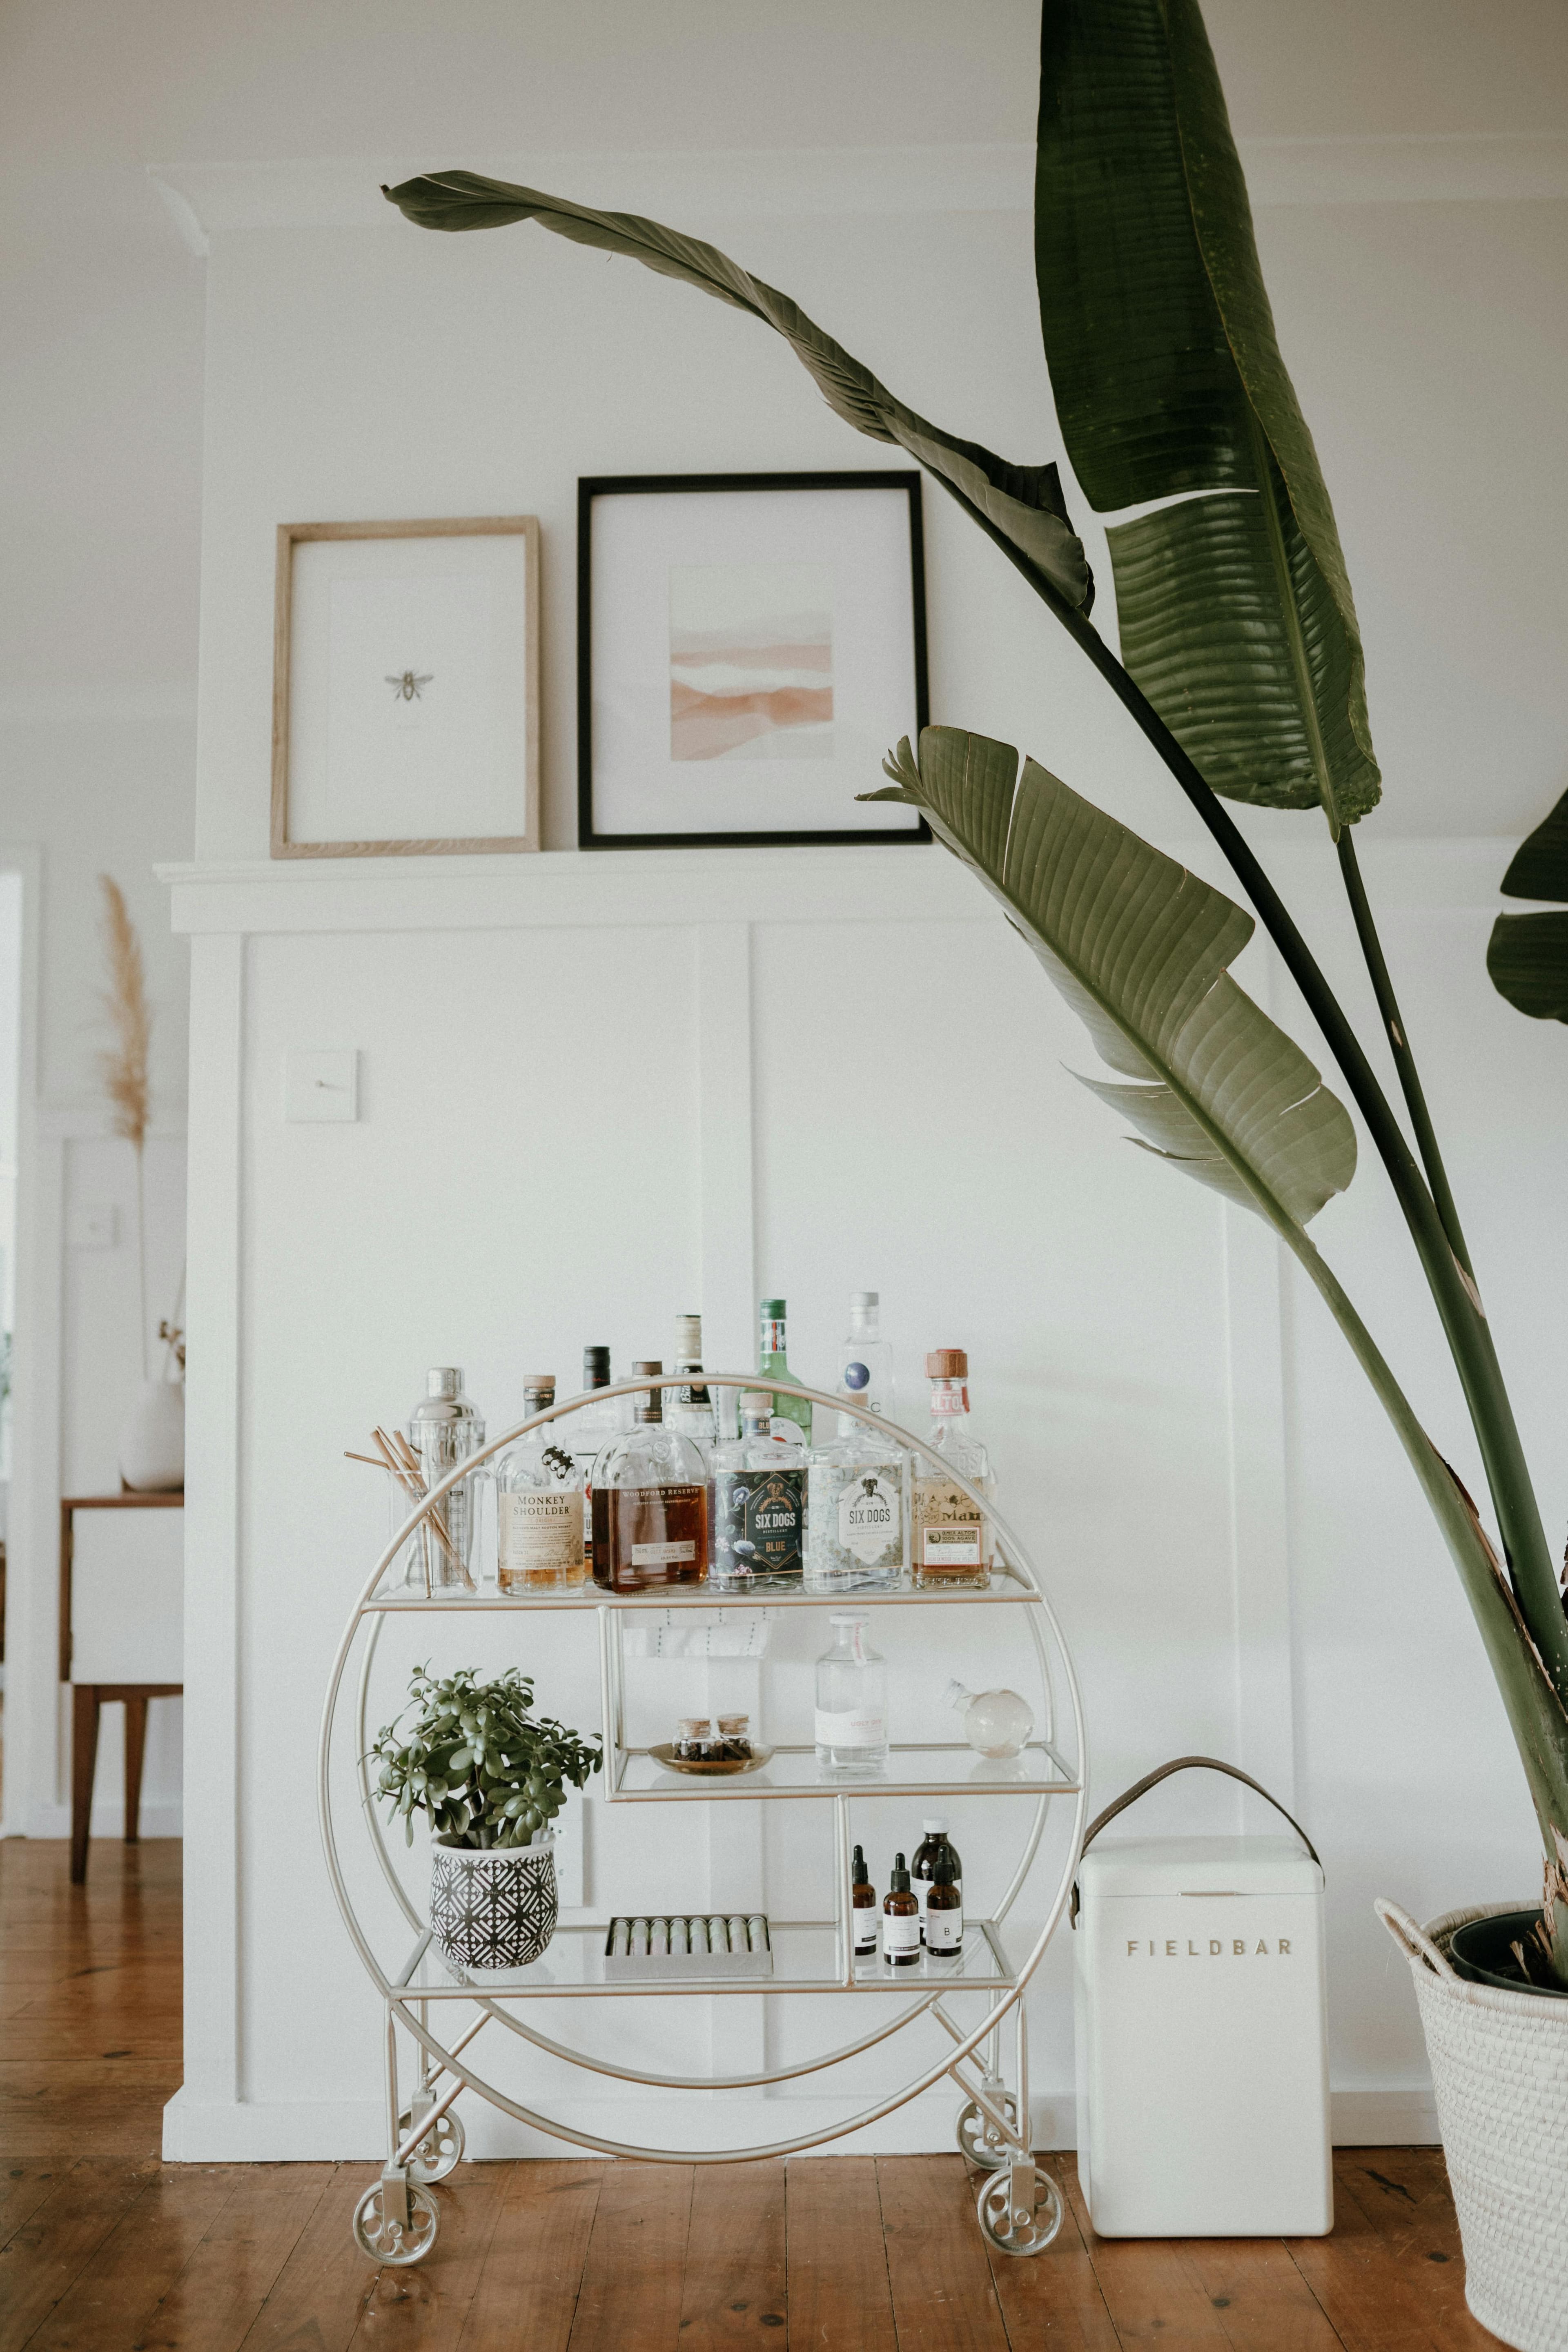 DIY Portable Bar Cart For Your Next Party: Design Hacks From Basic To Brilliant 